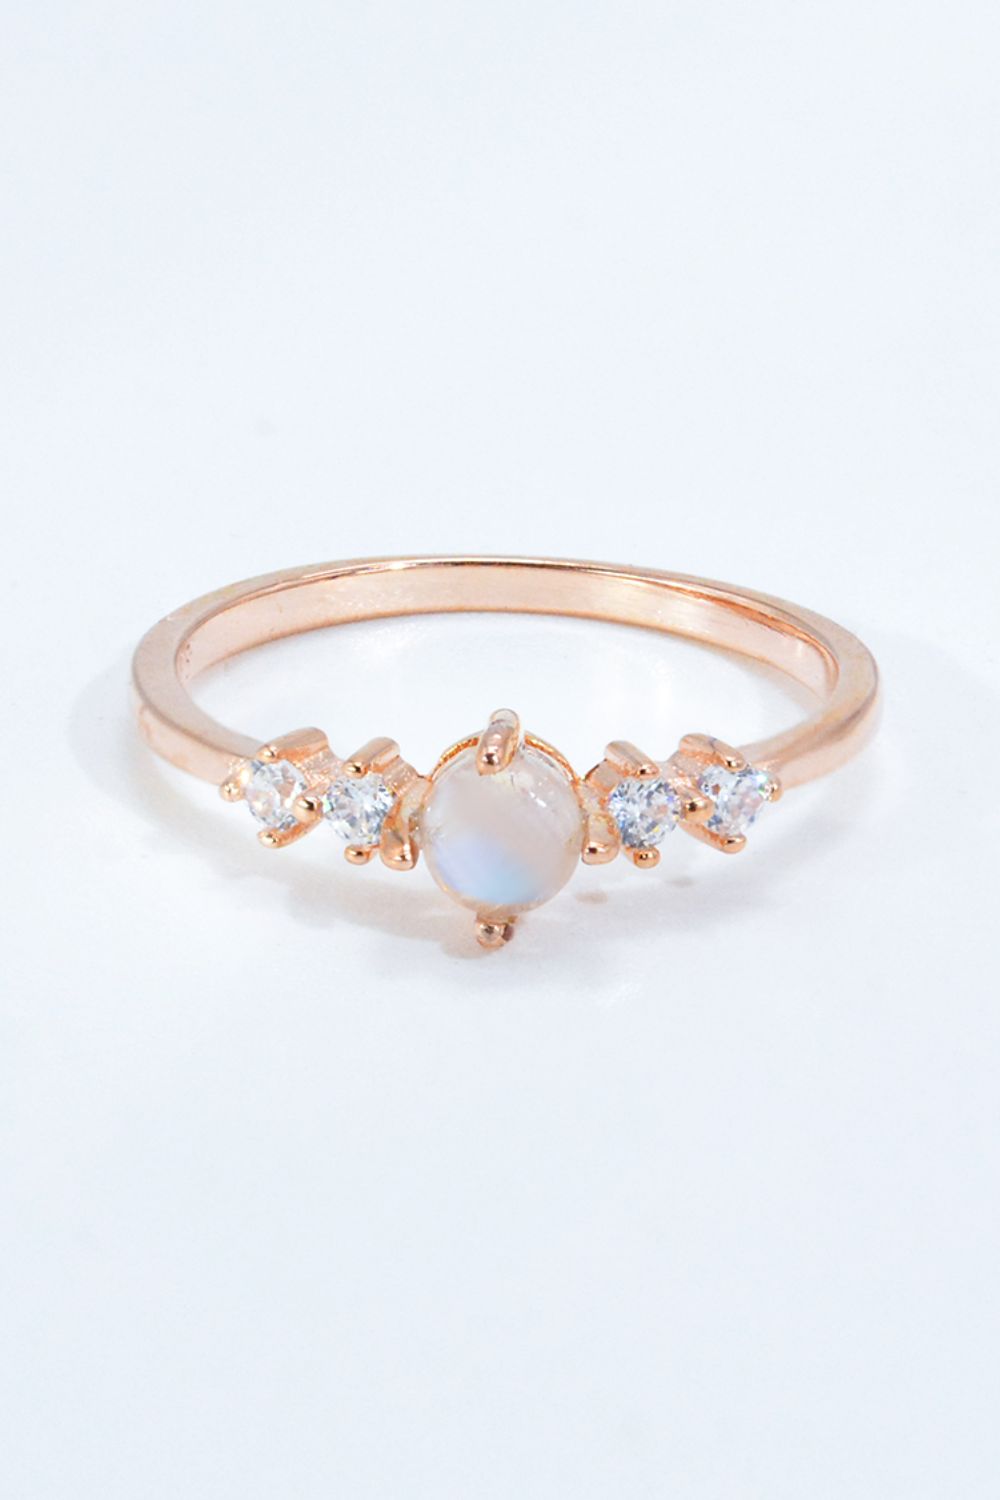 Natural Moonstone and Zircon 18K Rose Gold-Plated Ring - Ryzela